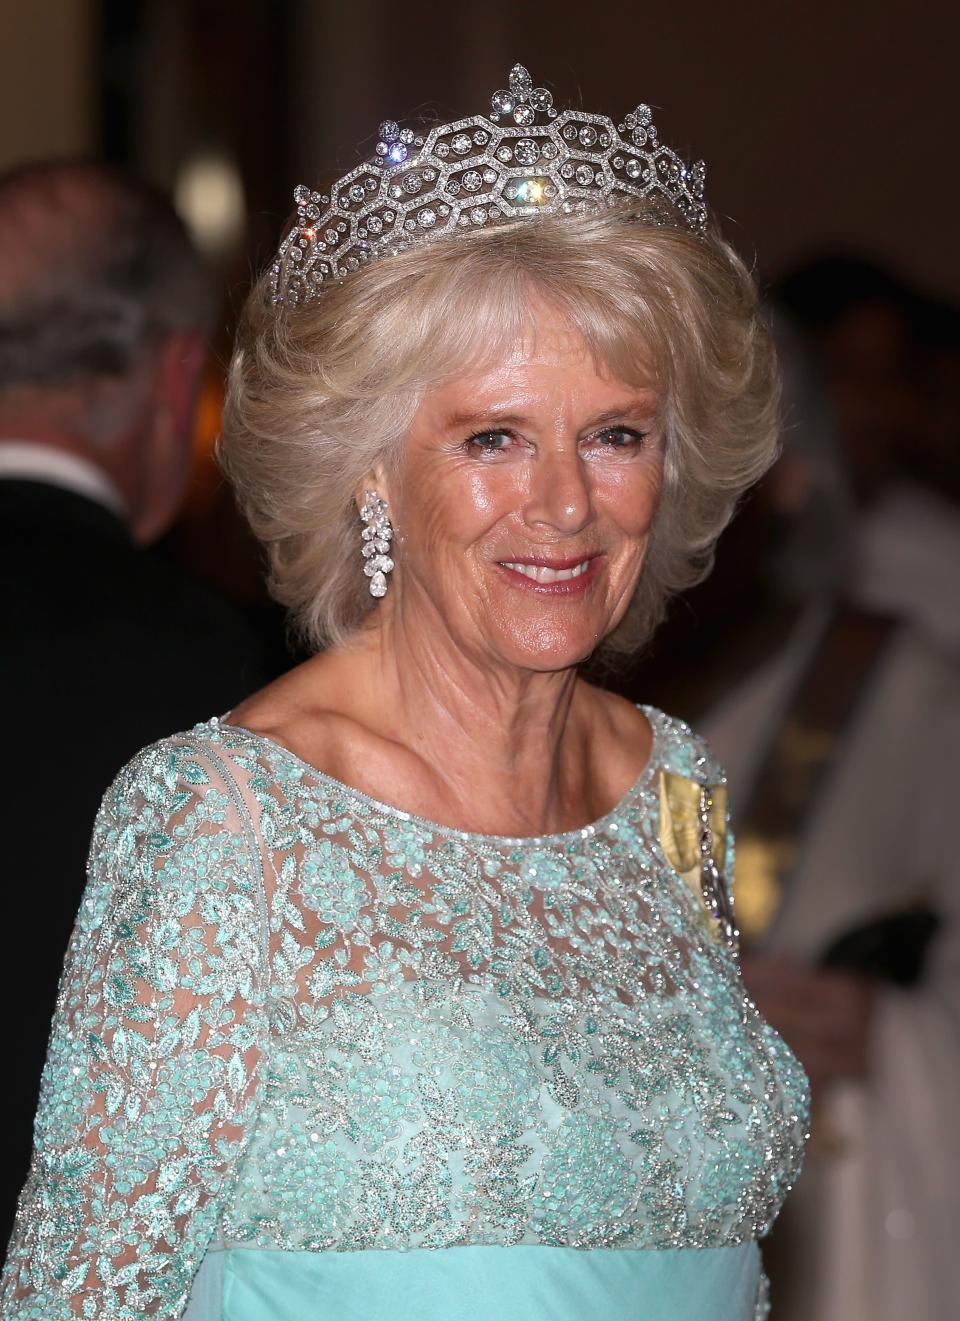 <p>Prince Charles's wife, Camilla, Duchess of Cornwall, has reportedly <a href="https://www.townandcountrymag.com/society/a24512379/camilla-parker-bowles-watches-the-crown/" rel="nofollow noopener" target="_blank" data-ylk="slk:watched The Crown" class="link ">watched <em>The Crown</em></a> in the past, but according to her nephew, she hasn't been looking forward to "the bits to come" namely, her character's appearances on the show. While we saw <a href="https://www.townandcountrymag.com/leisure/arts-and-culture/a34362311/emerald-fennell-camilla-parker-bowles-the-crown-smoking-quote/" rel="nofollow noopener" target="_blank" data-ylk="slk:Emerald Fennell" class="link ">Emerald Fennell</a> as Camilla in the past two seasons, Olivia Williams will play the royal in the show's <a href="https://www.townandcountrymag.com/leisure/arts-and-culture/a30729276/the-crown-season-5/" rel="nofollow noopener" target="_blank" data-ylk="slk:upcoming fifth season" class="link ">upcoming fifth season</a> (premiering this fall). Until then, take a look back at Camilla in real life—from her younger years before marrying Charles to her current work as a senior royal—and get ready to compare and contrast. </p>